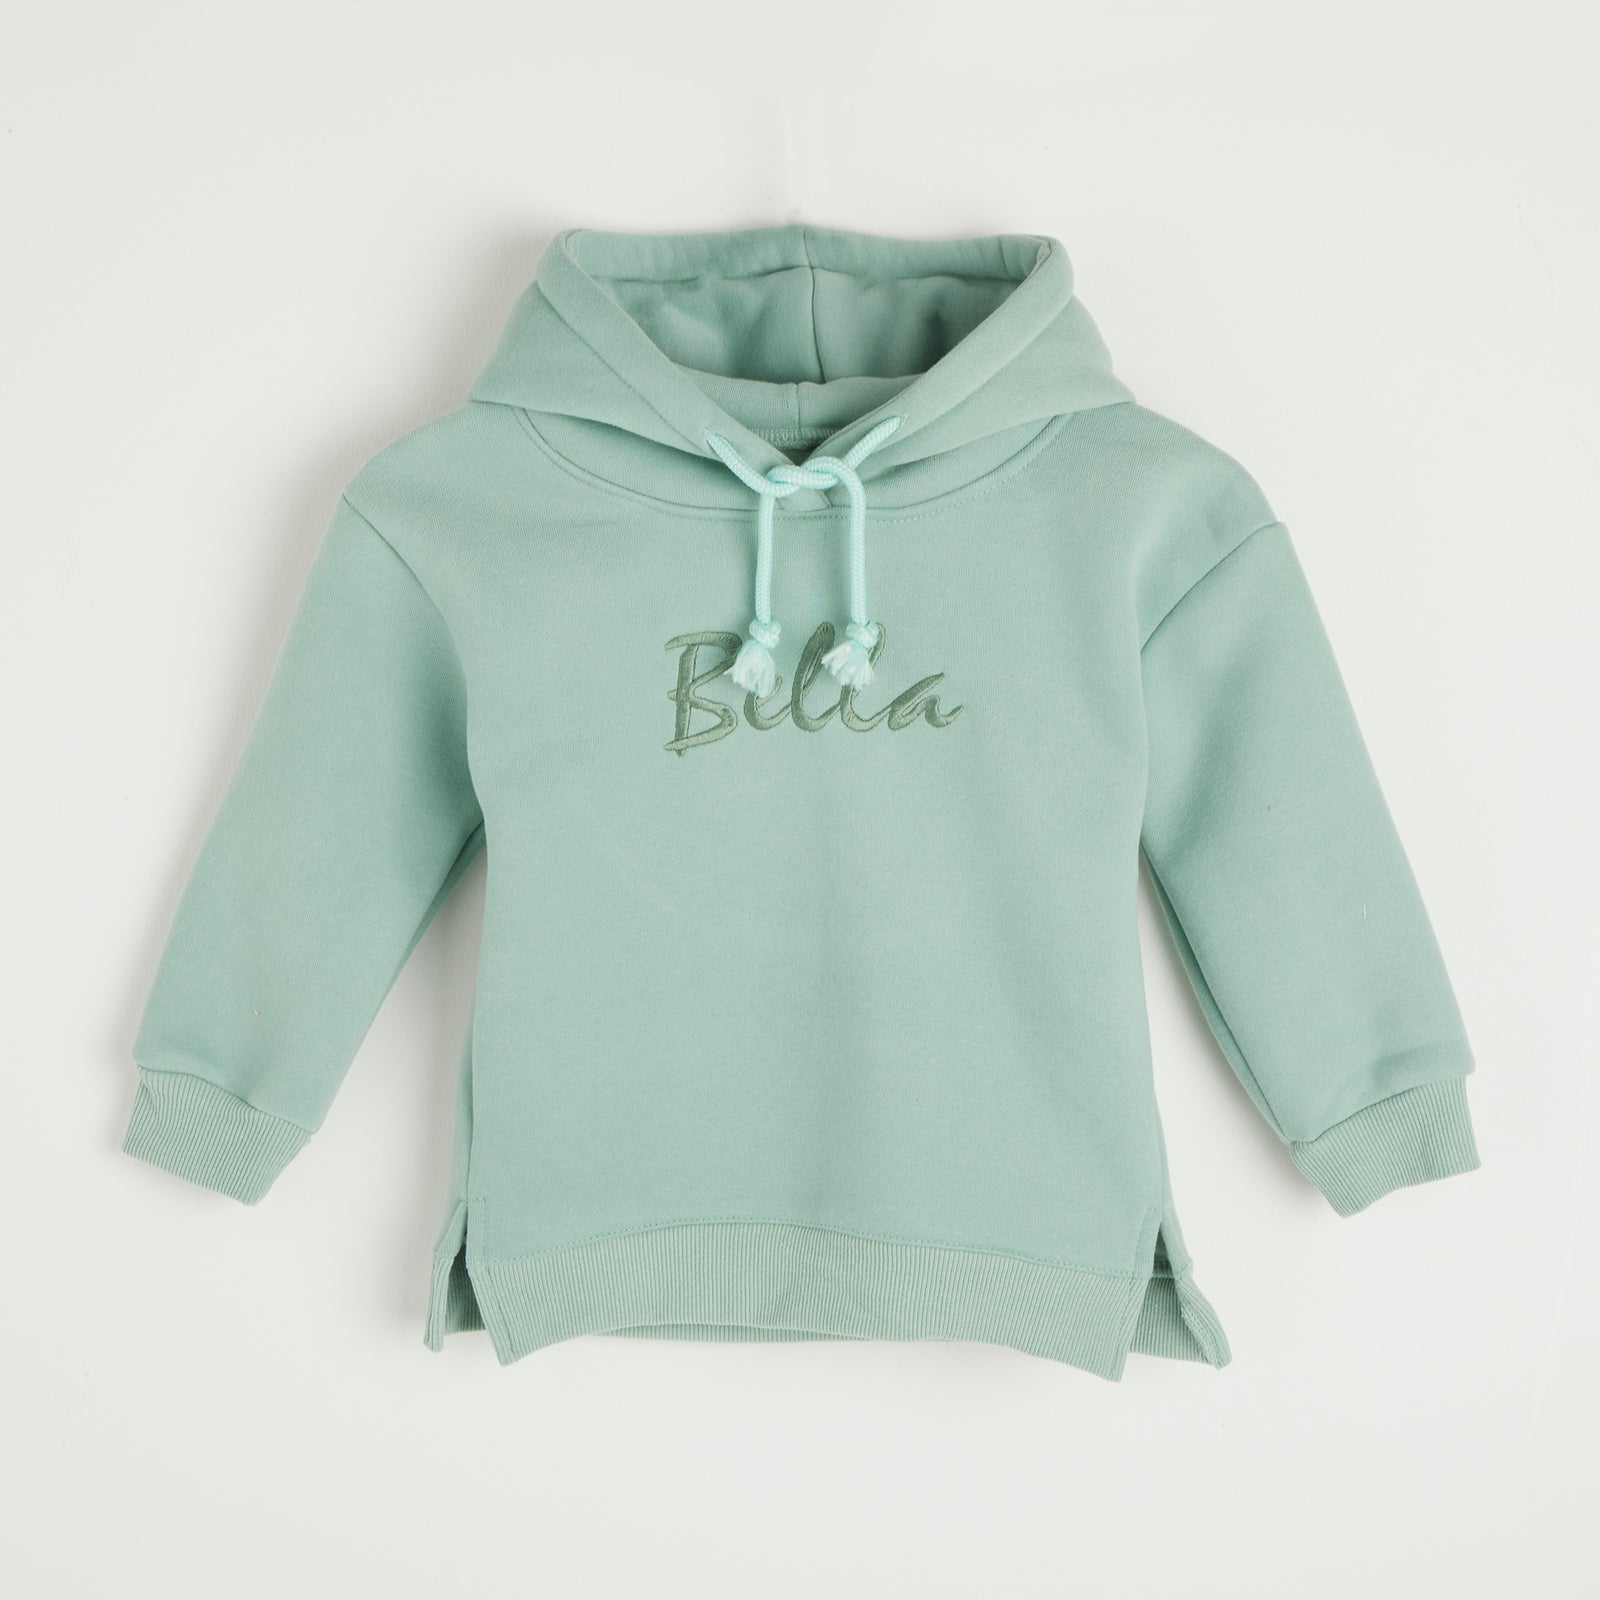 Embroidered Teal Bunny Ear Hoodie